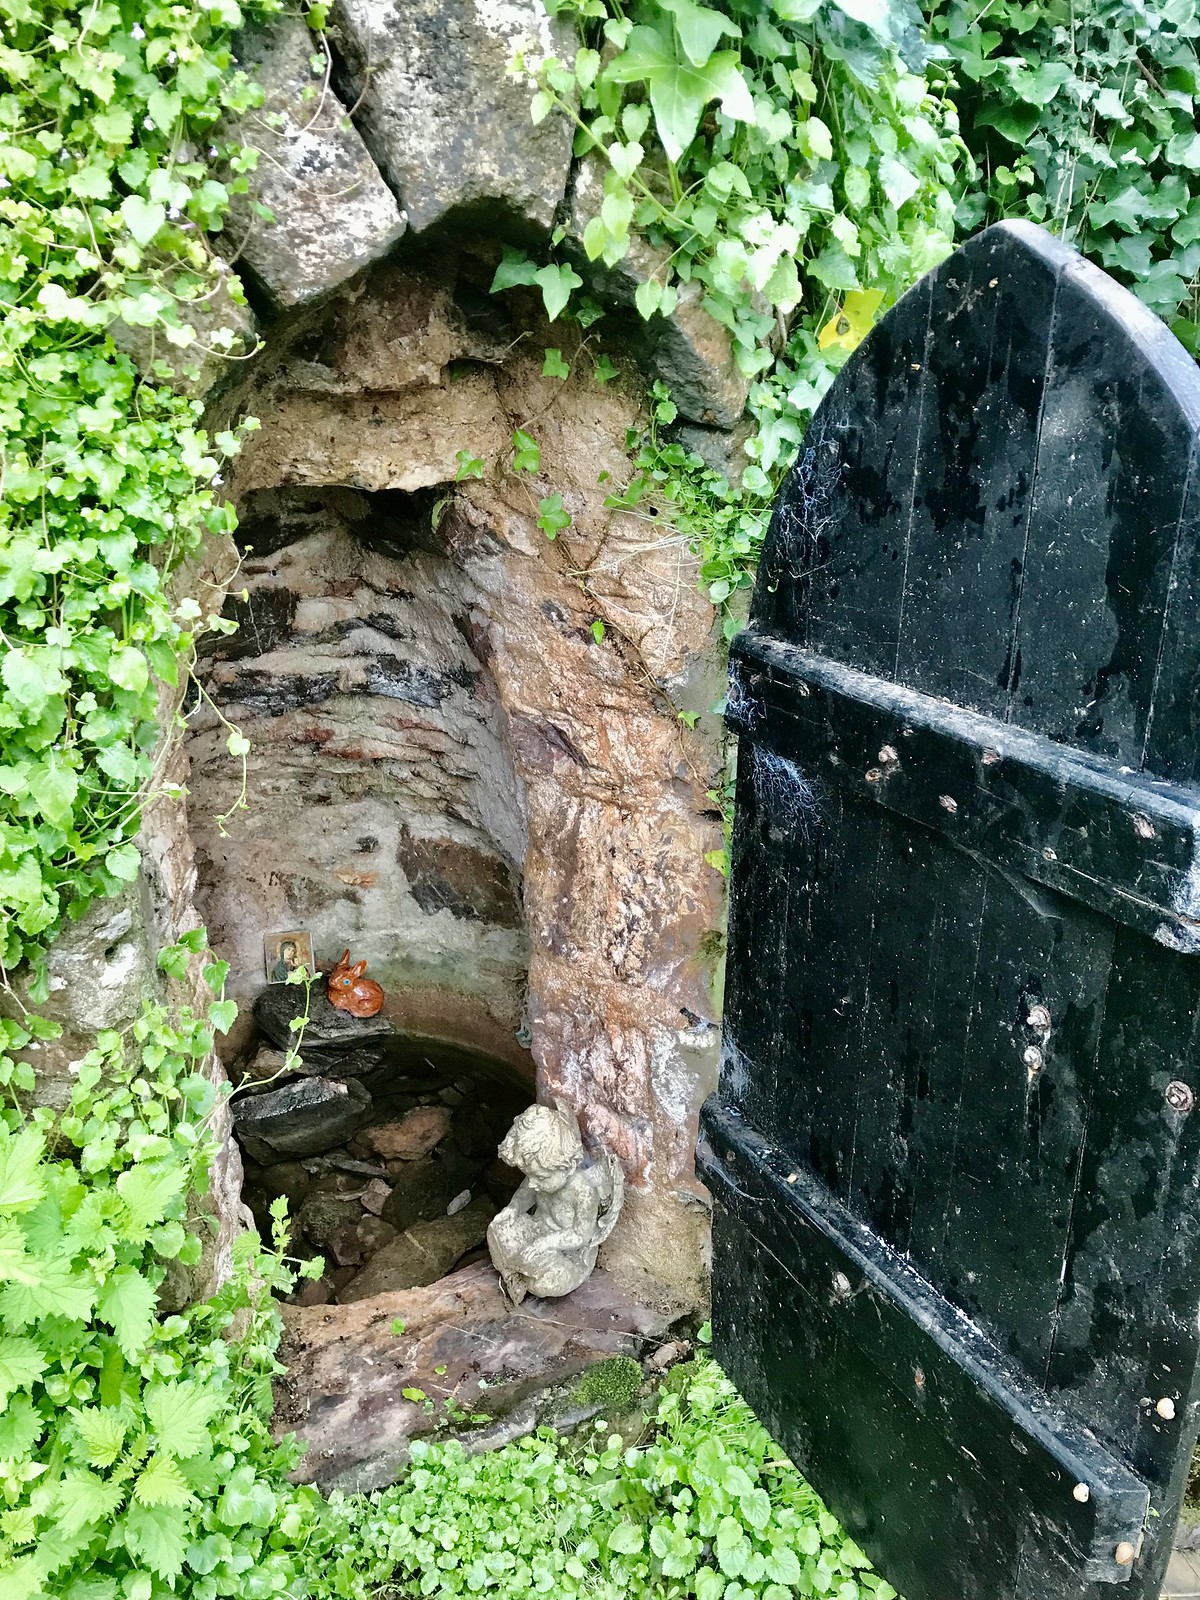 The ancient well, giving the village its name as the place owned by the Abbot, where (water)cress grew by the well - ABBOTSKERSWELL!